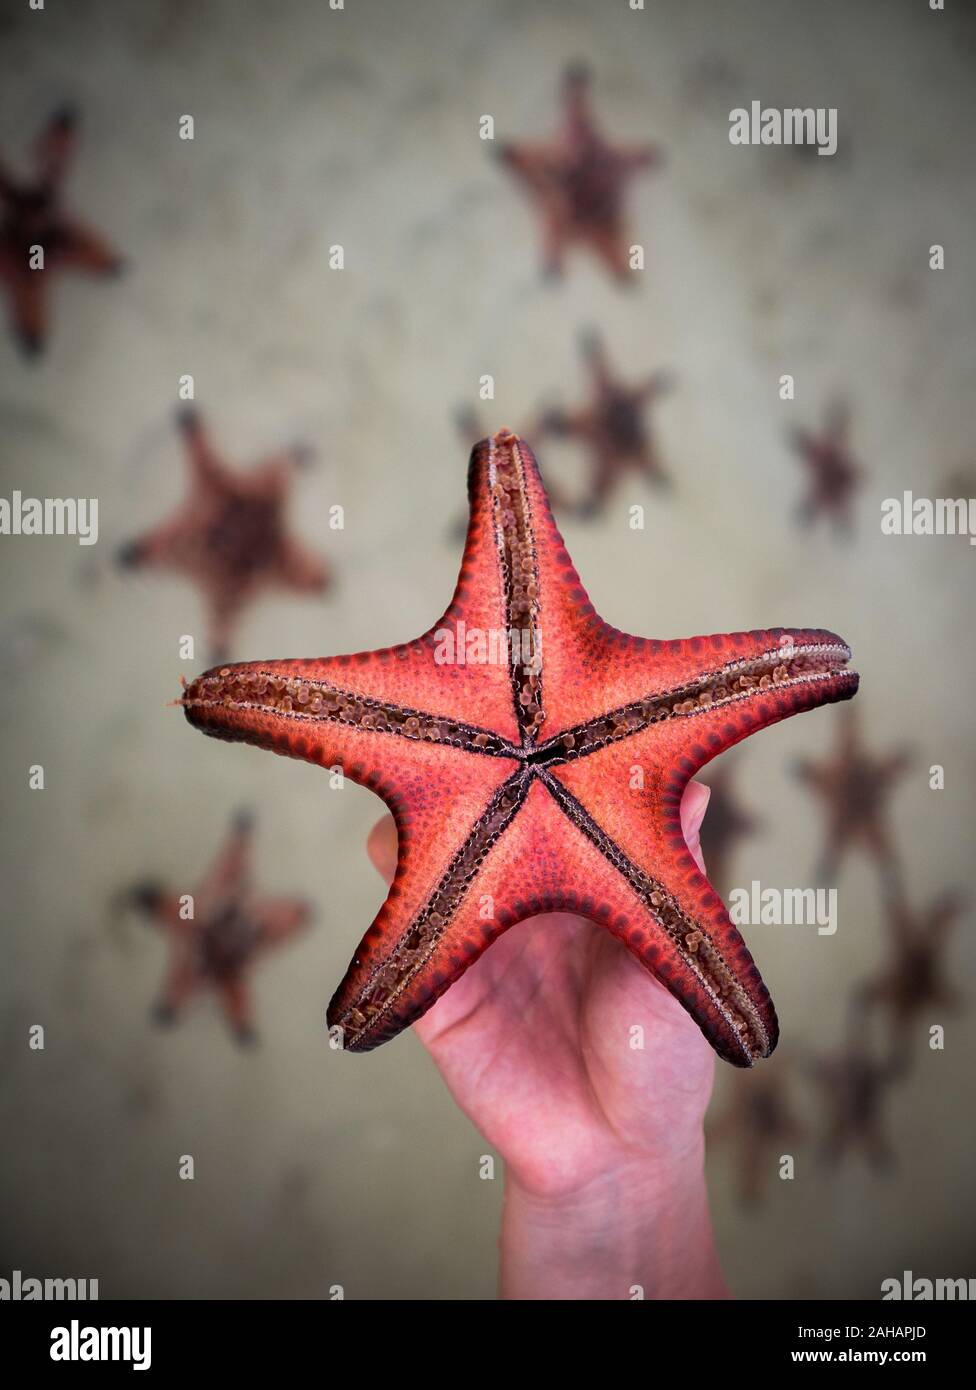 Female hand holding starfish with plenty of starfishes in background Stock Photo